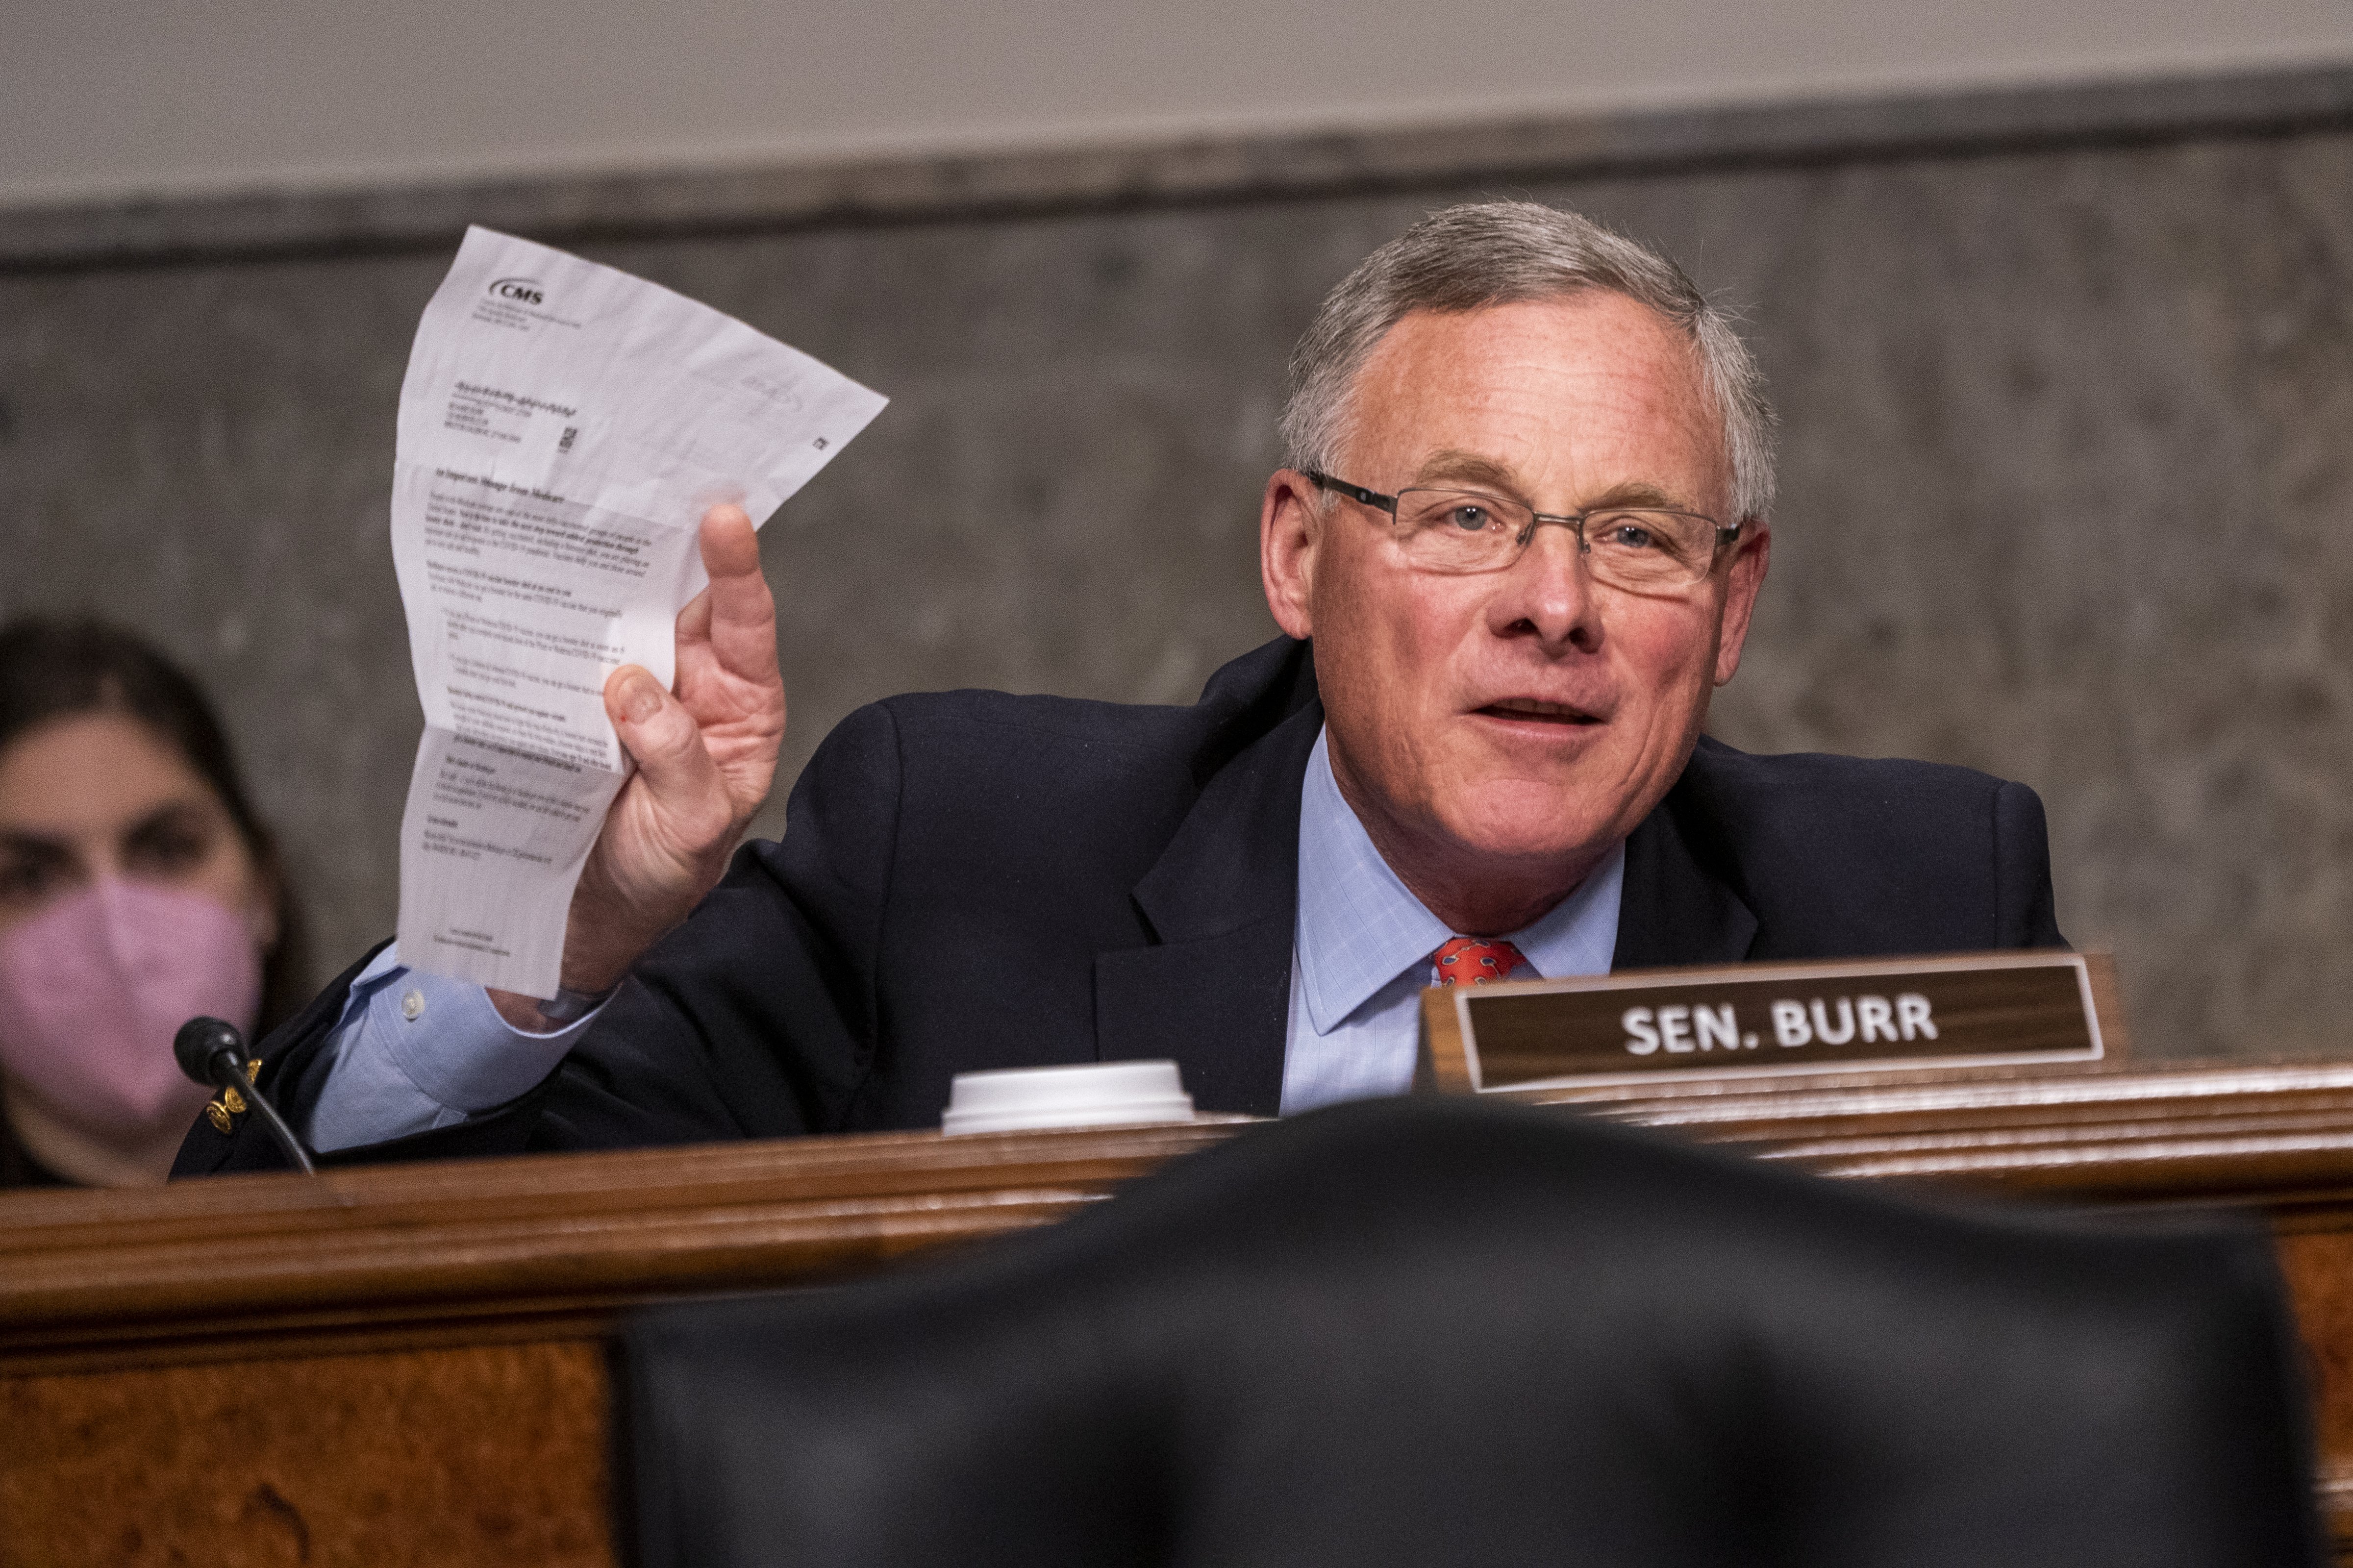 Senator Richard Burr, a Republican from North Carolina, speaks during a Senate Health, Education, Labor, and Pensions Committee hearing in Washington, D.C., U.S., on Jan. 11, 2022. (Shawn Thew—EPA/Bloomberg/Getty Images)